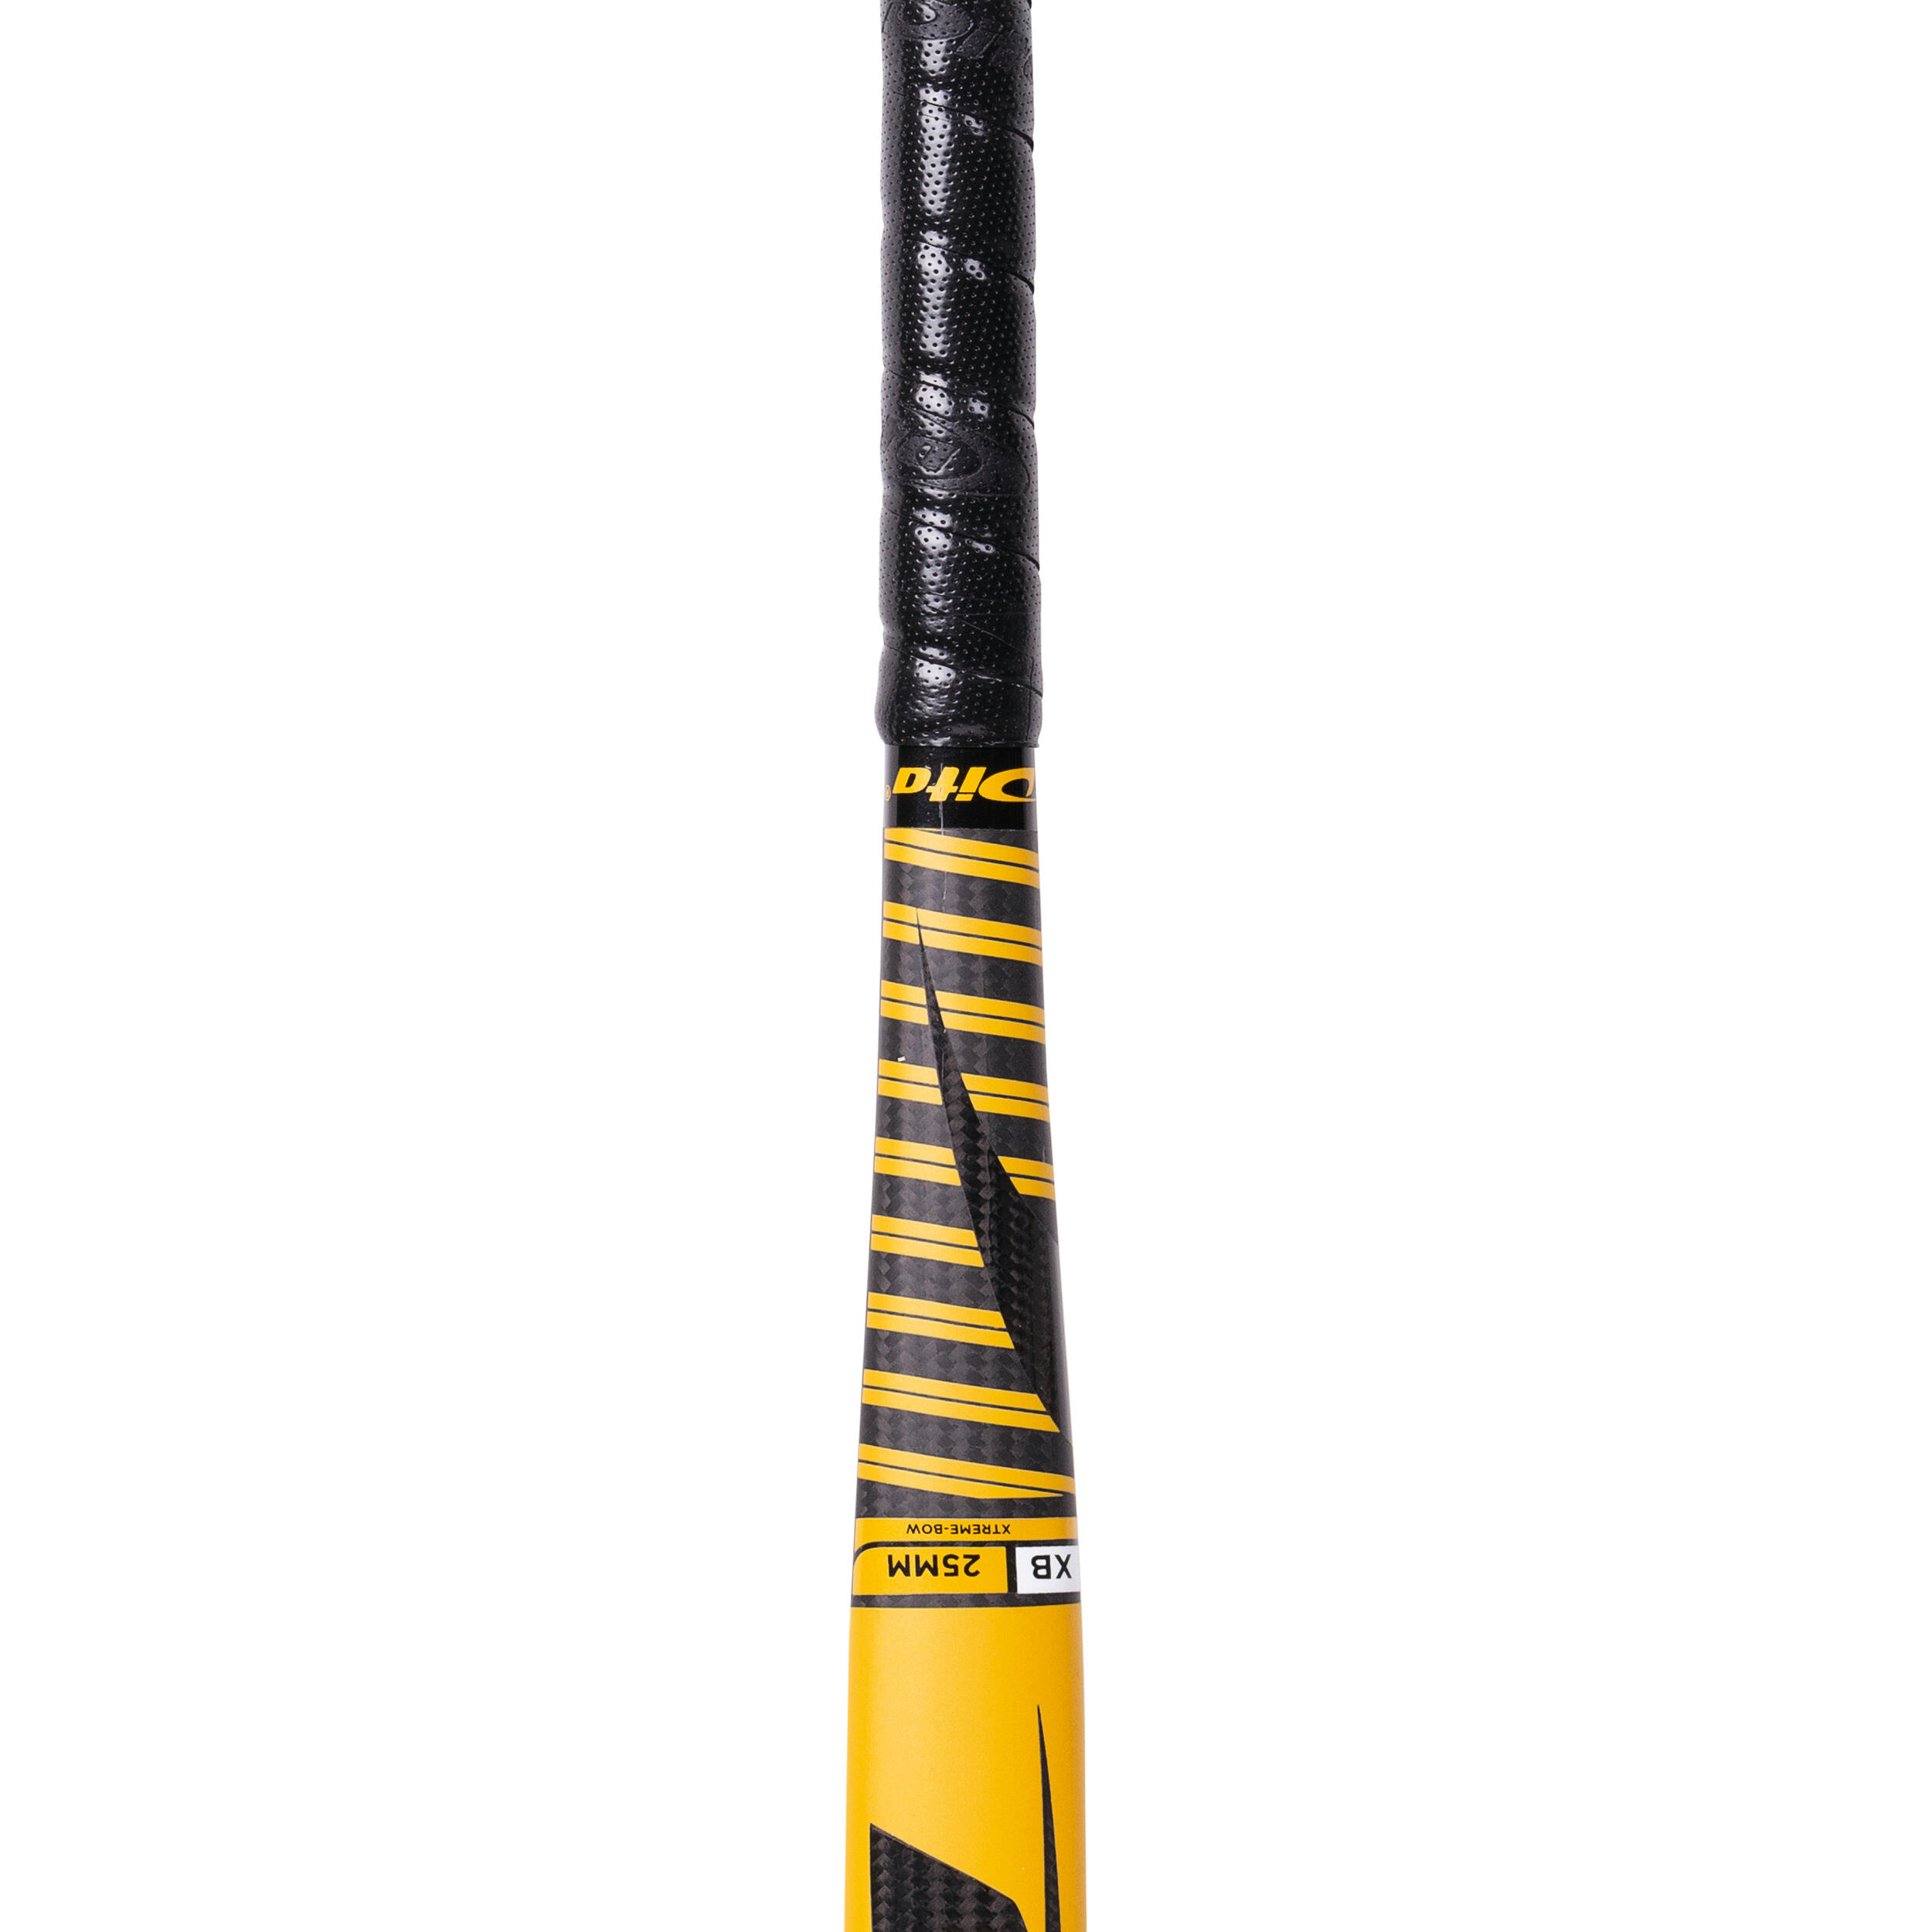 Adult Advanced 85% Carbon X Low Bow Field Hockey Stick carbotecC85 - Gold/Black 13/13